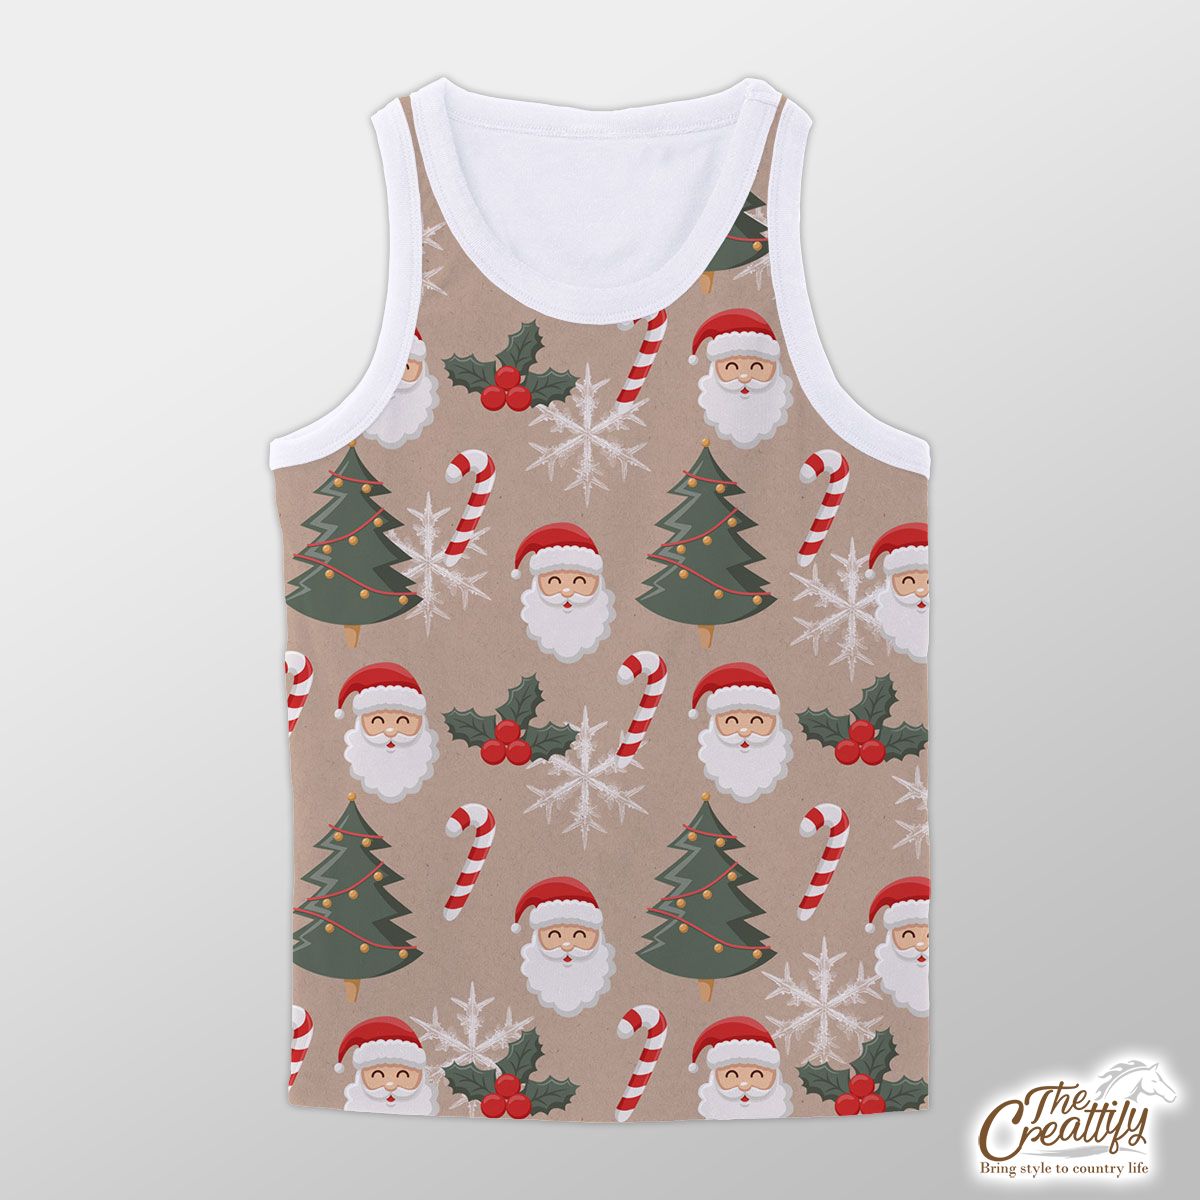 Santa Clause, Christmas Tree, Candy Cane, Holly Leaf On Snowflake Background Unisex Tank Top